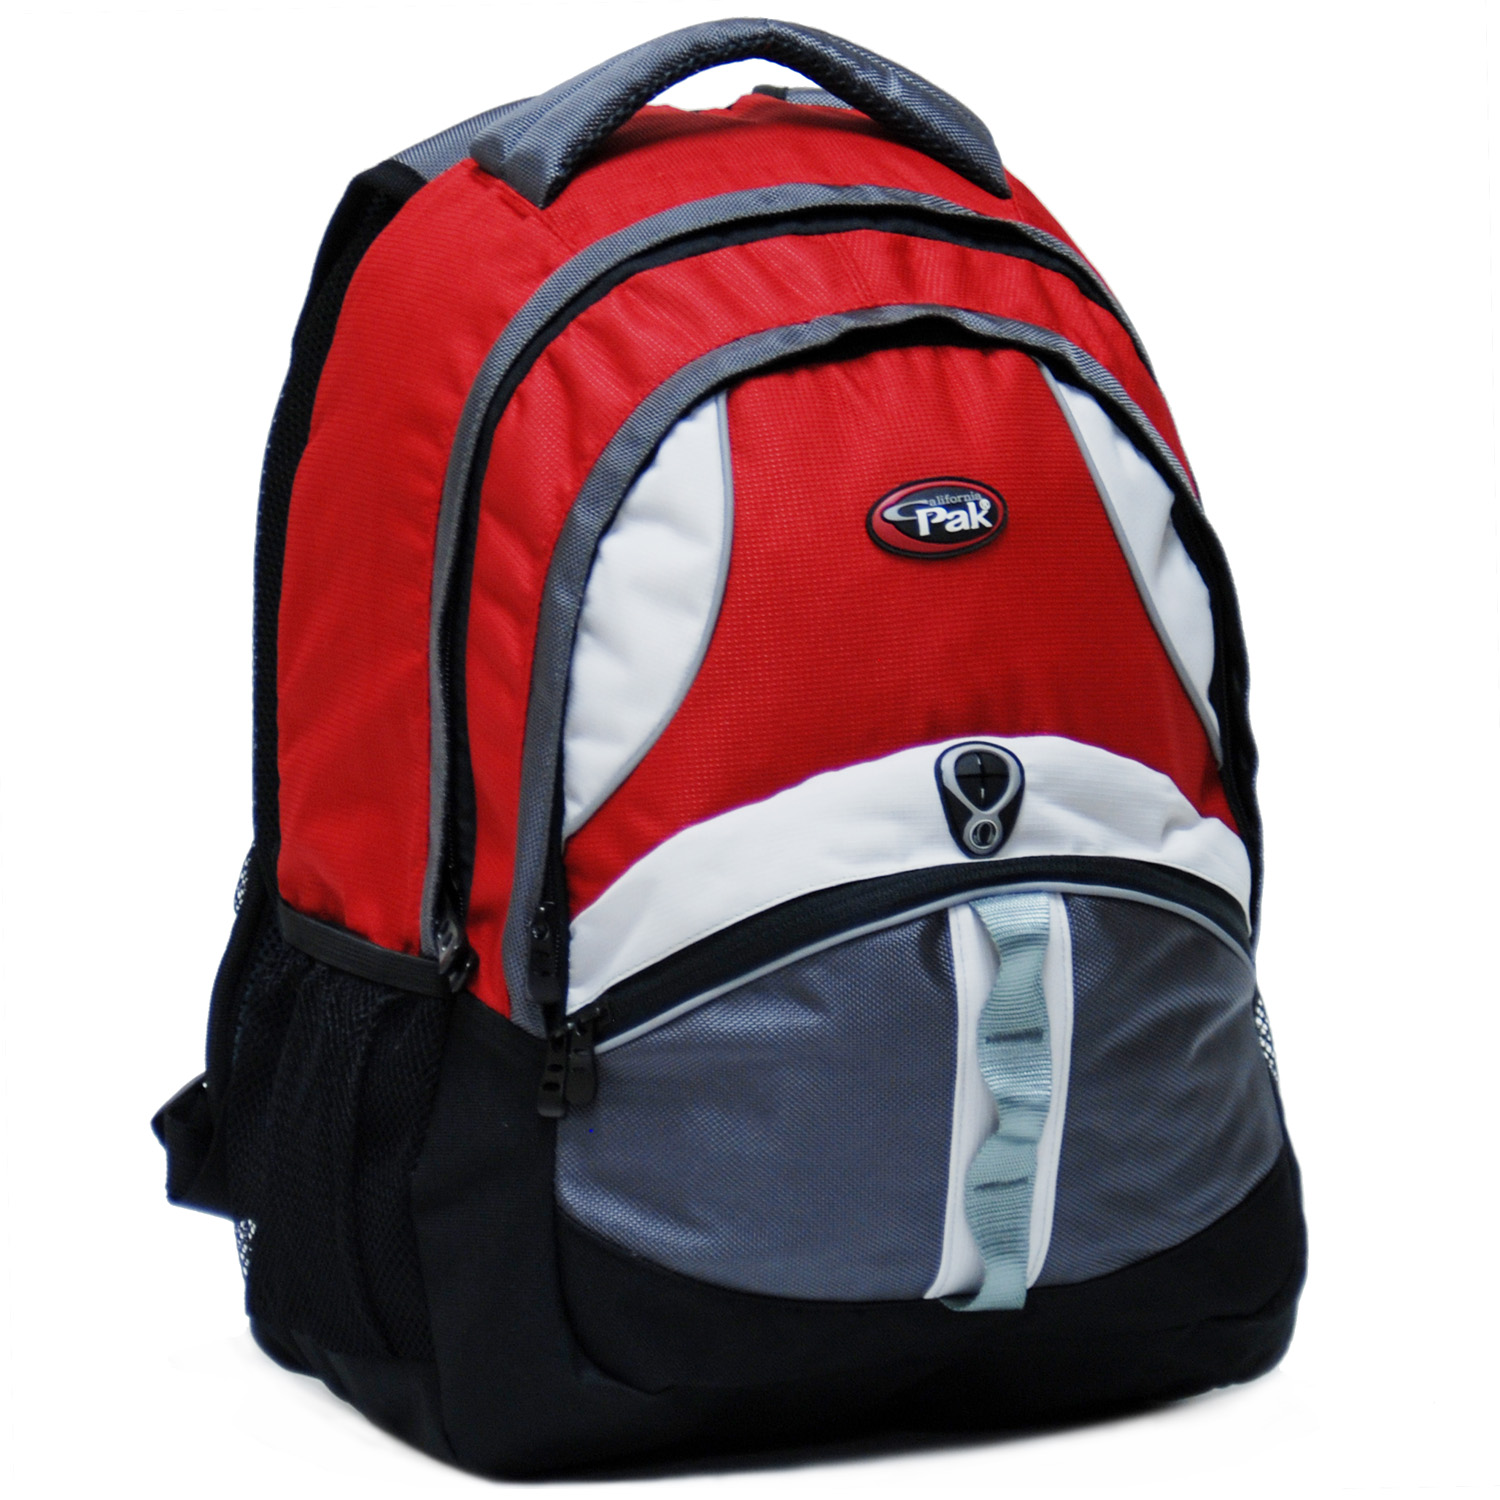 18" Backpack With Reflective Tape